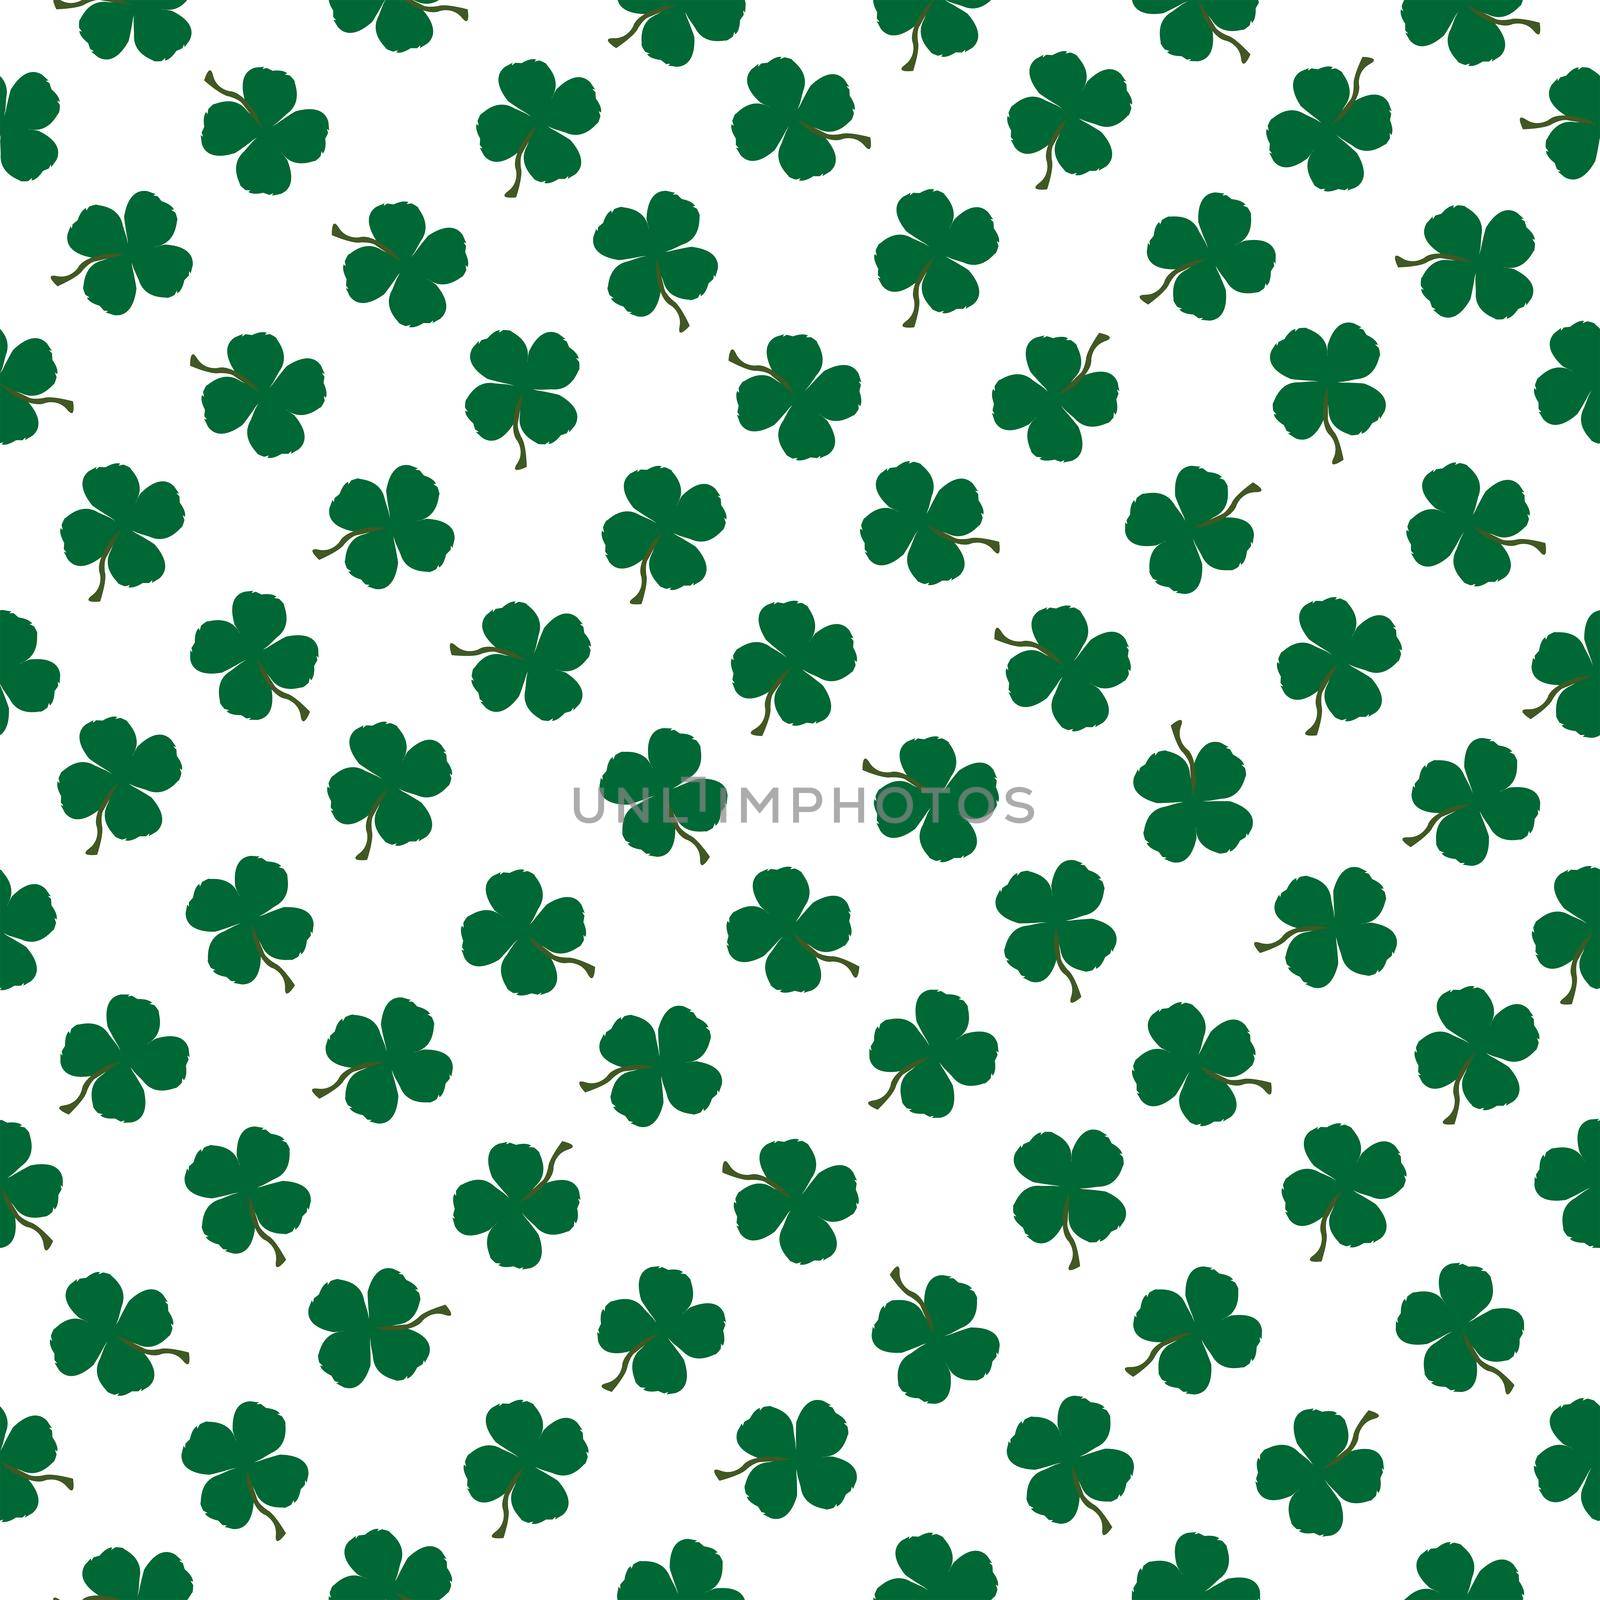 Seamless pattern with clovers on white background